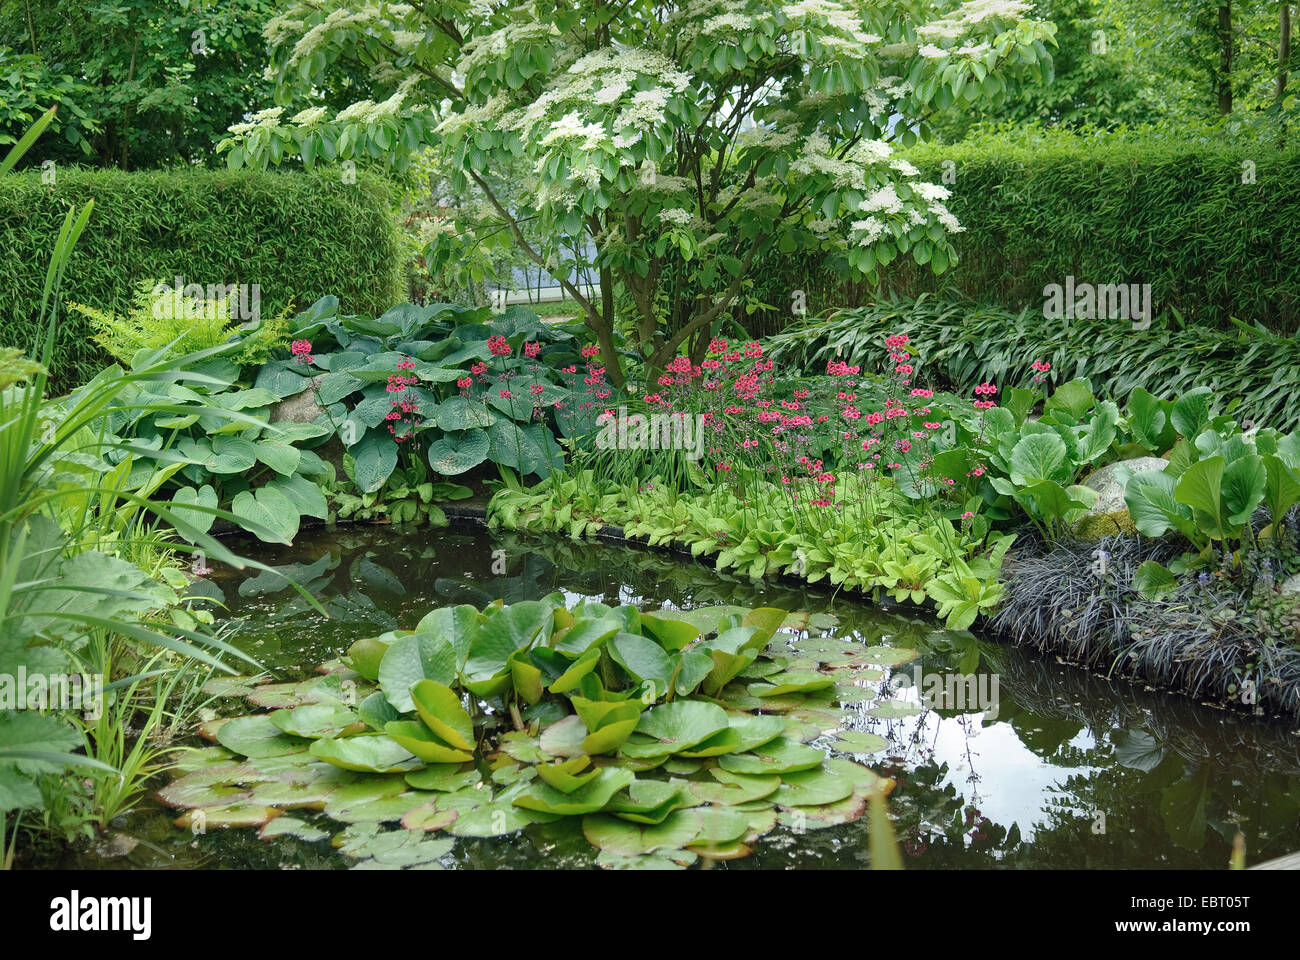 giant dogwood (Cornus controversa), blooming at a garden pond, Germany Stock Photo